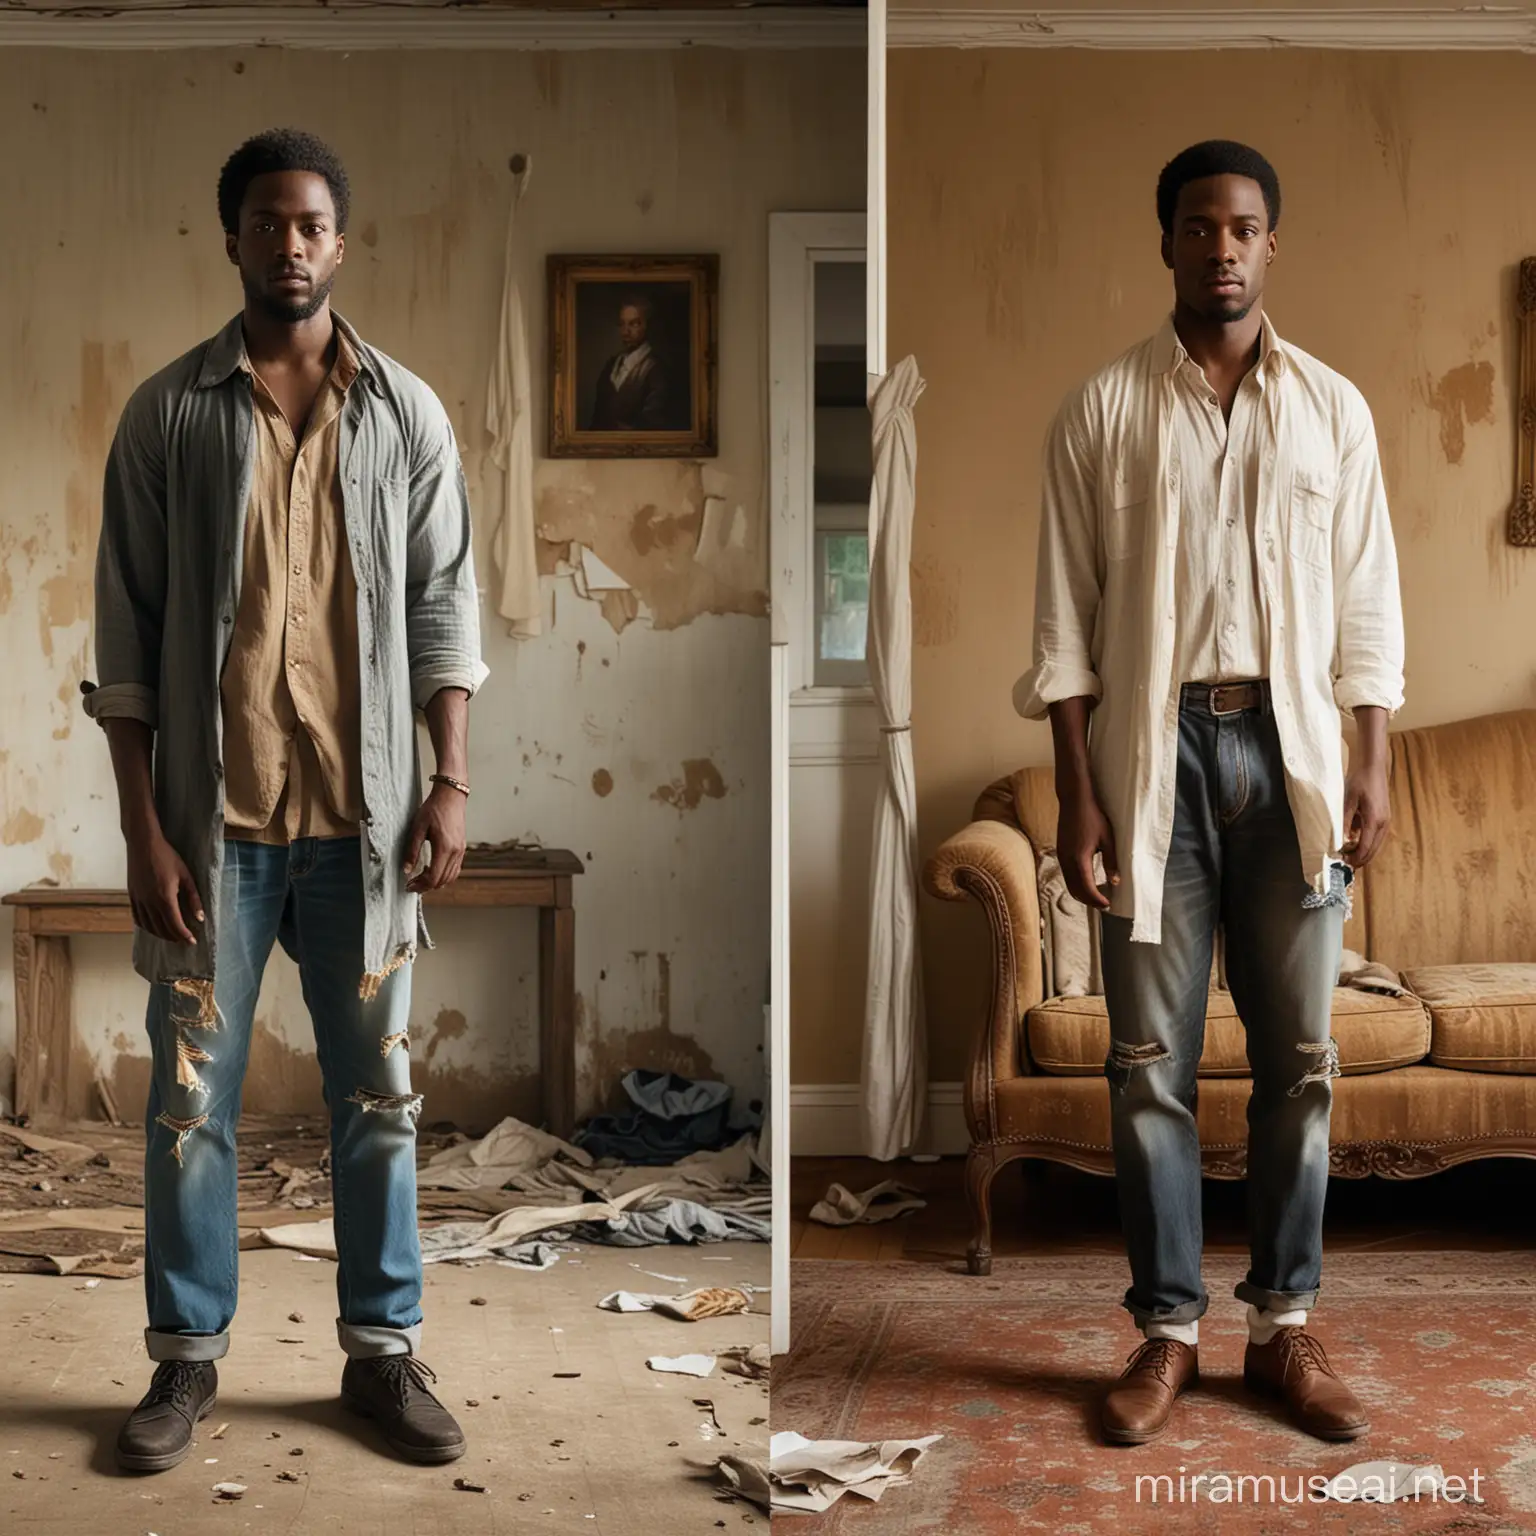 Create a split-image of an African American man, showcasing two contrasting lifestyles. On the left side, depict him in a humble setting, dressed in worn-out and torn clothes, standing in a modest living space. On the right side, show him in a luxurious environment, wearing elegant, expensive attire, standing in an upscale living room. Emphasize the transformation from poverty to wealth in a single individual.